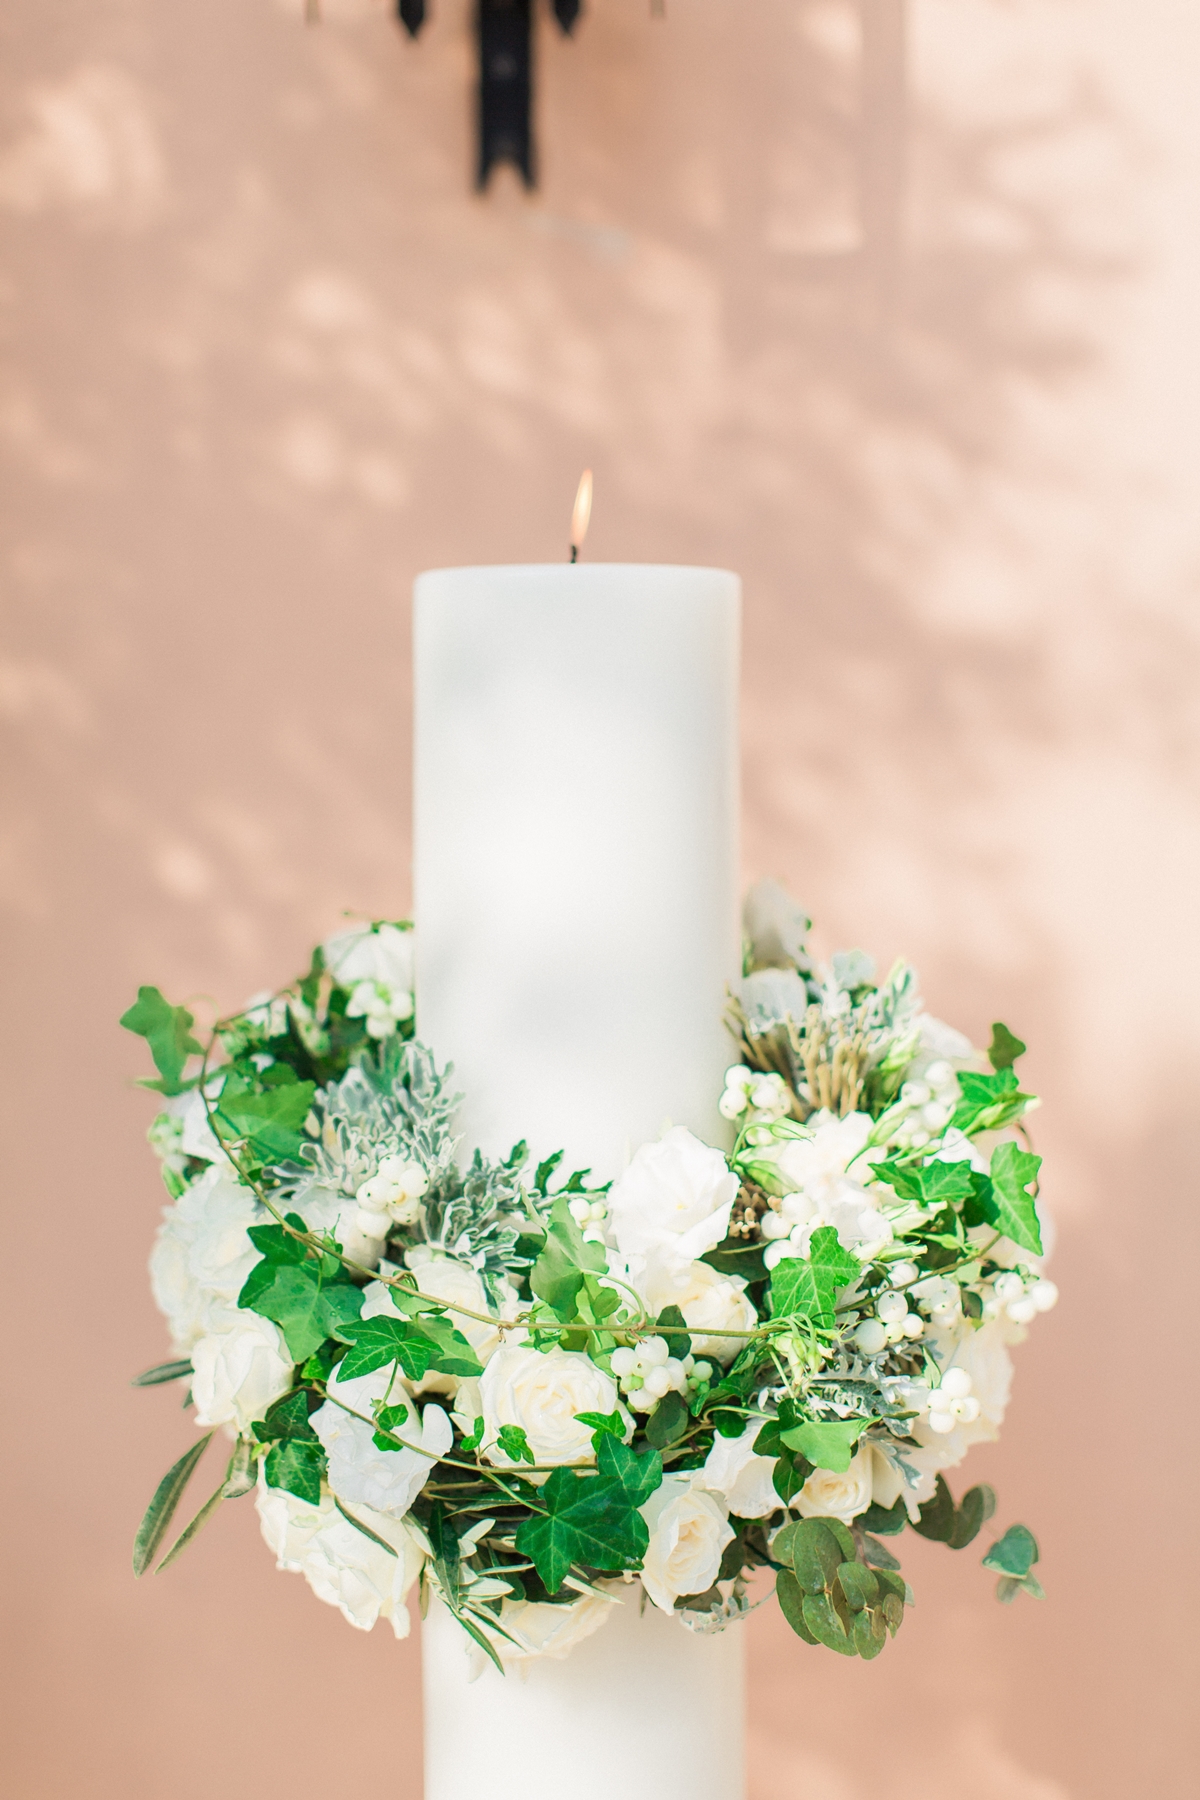 Wedding candles with white roses, olive leaves and ivy